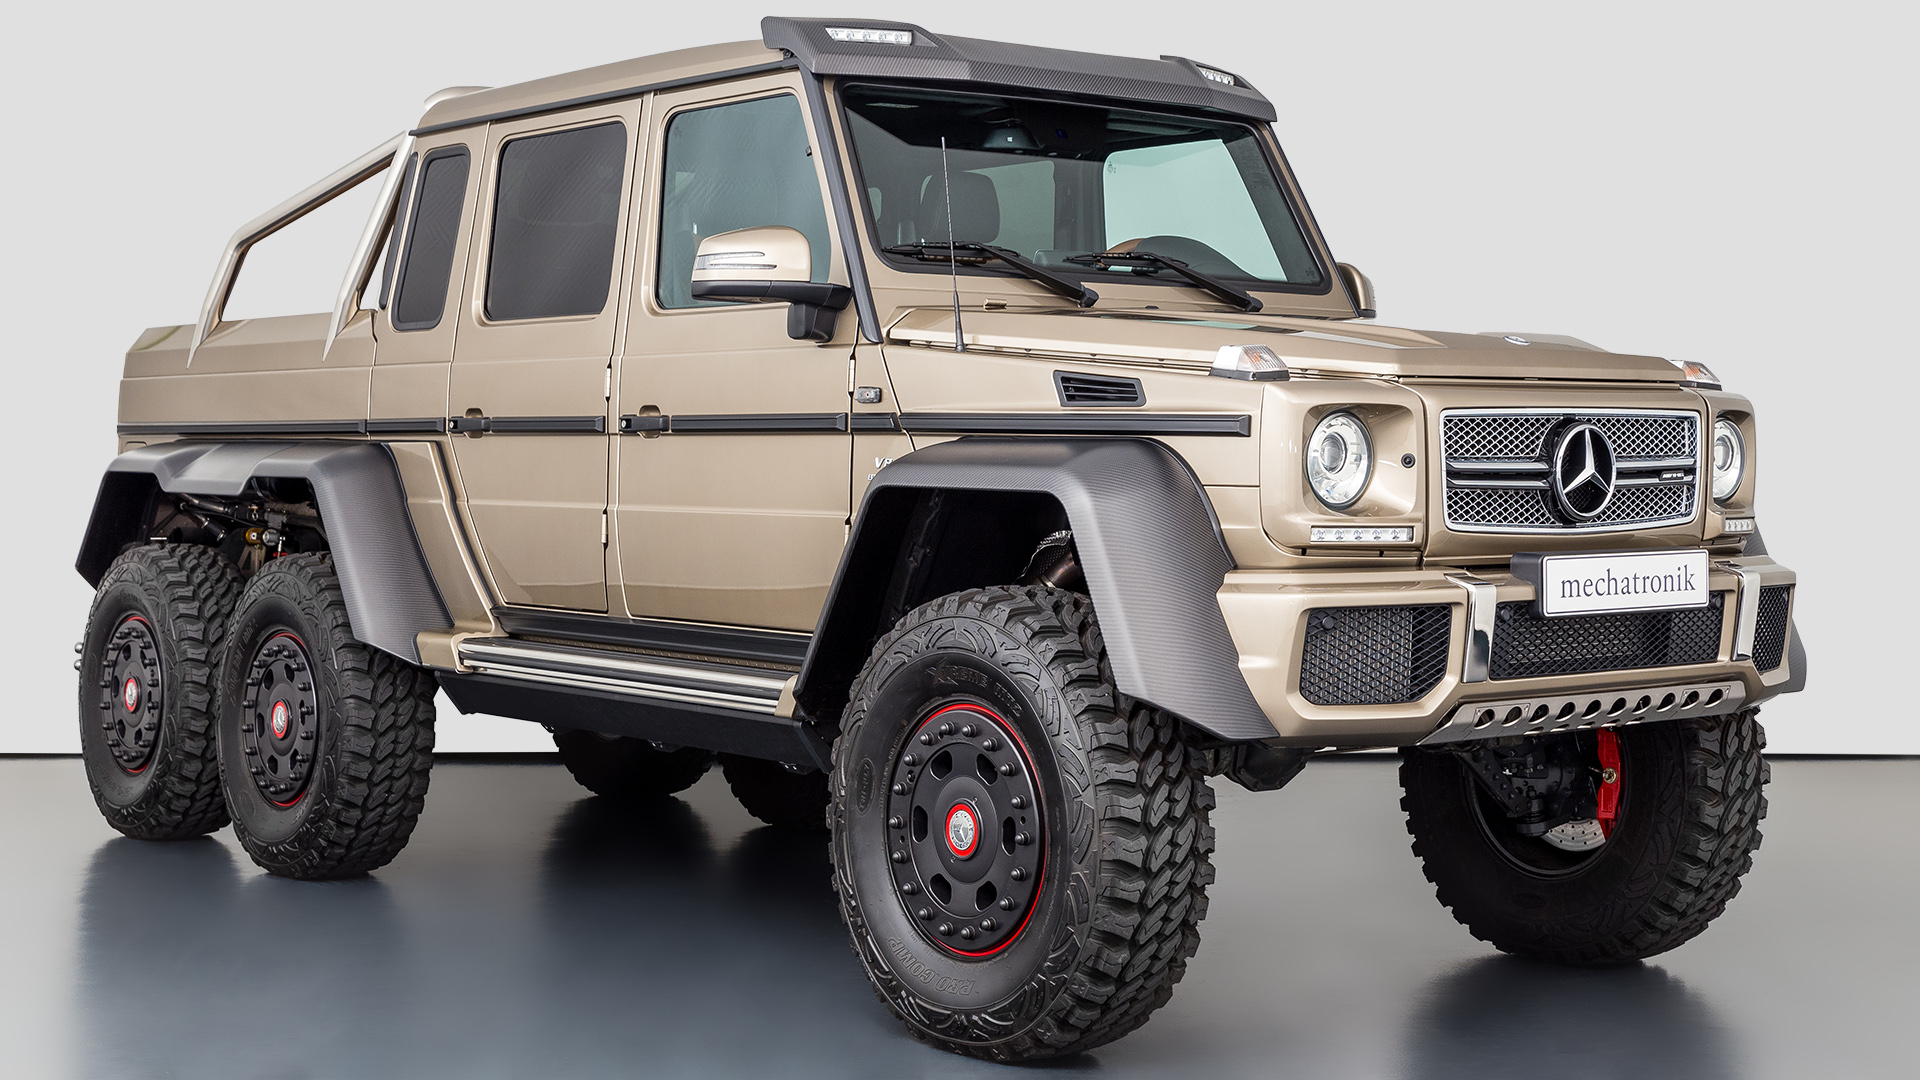 MERCEDES BENZ G63 AMG 6 215 6 Mechatronik GmbH Germany For sale on 